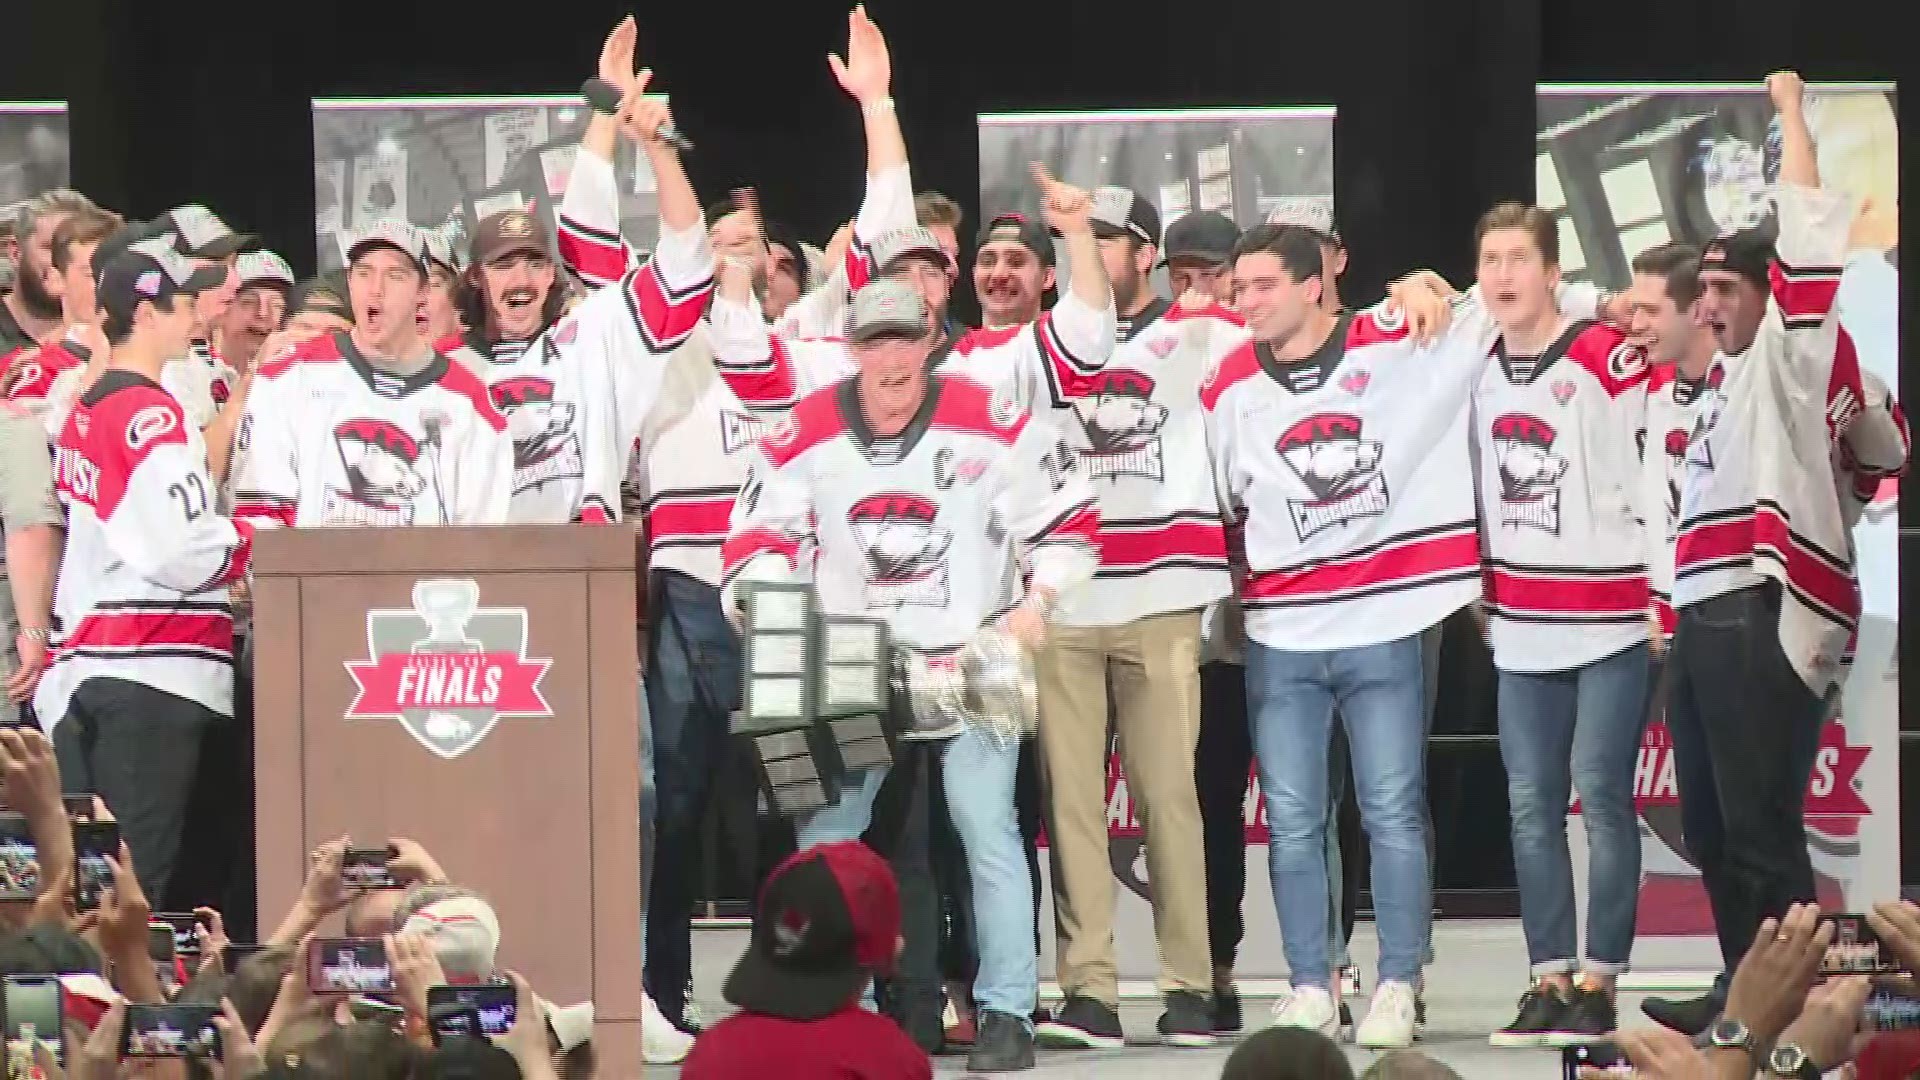 Former UMaine Black Bear Dan Renouf joins his teammates on the Charlotte Checkers in a celebration of their Calder Cup championship in Charlotte, N.C. on June 10, 2019.